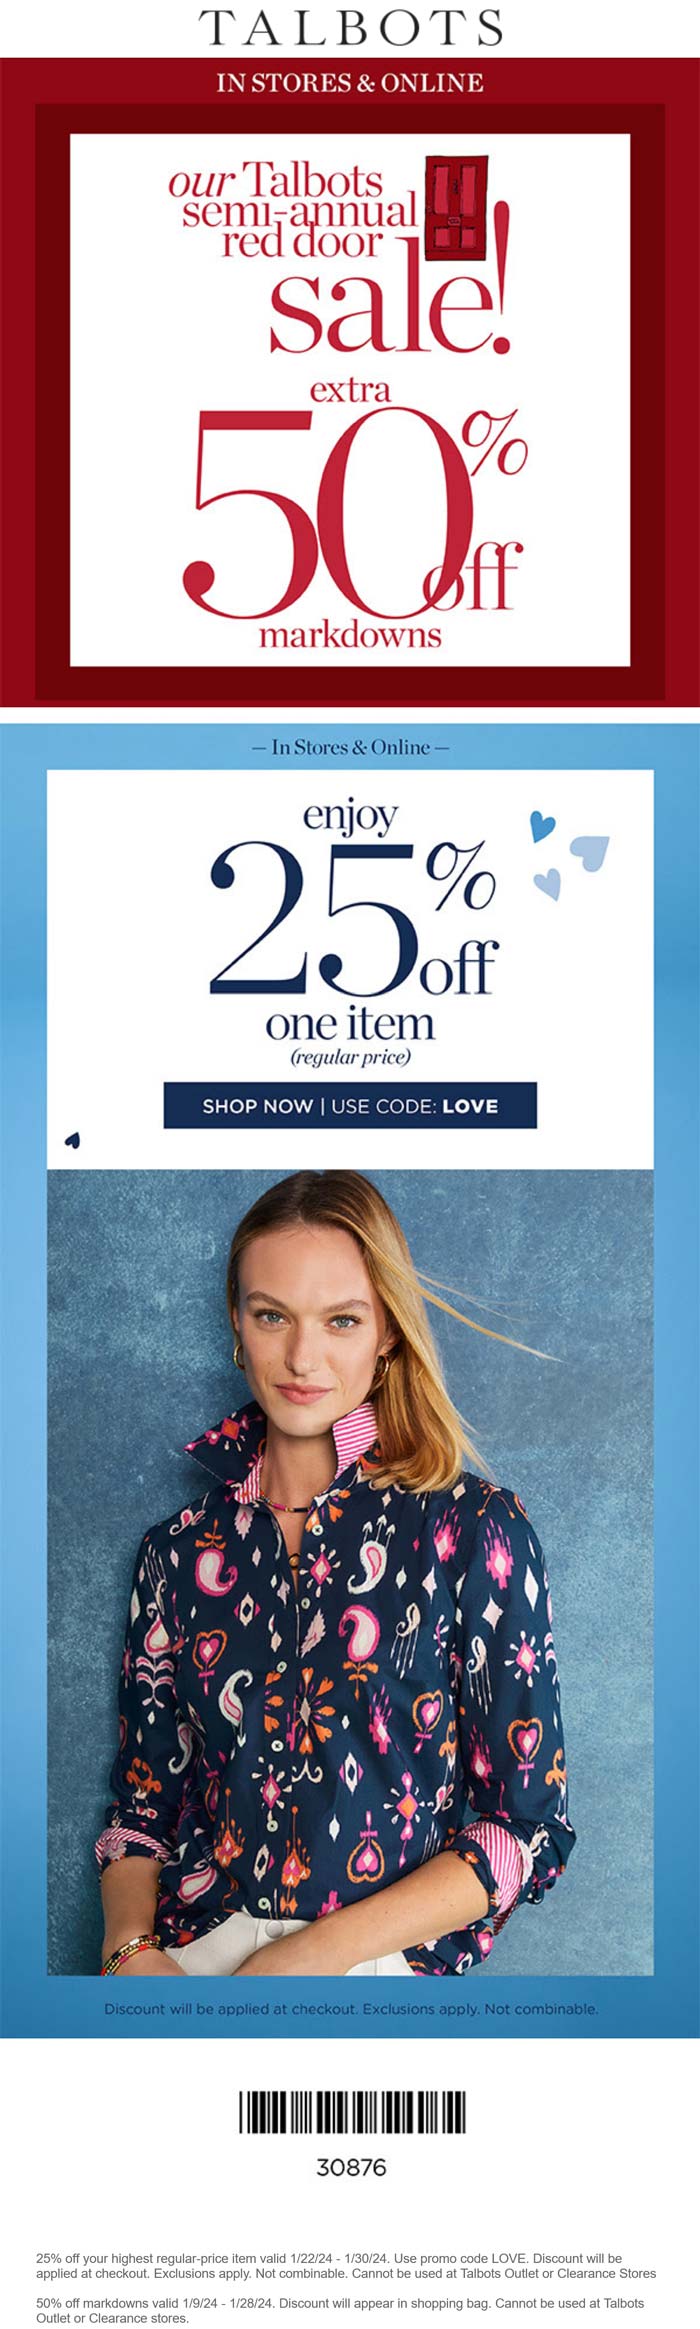 25% off a single regular item & 50% off sale items at Talbots, or online via promo code LOVE #talbots